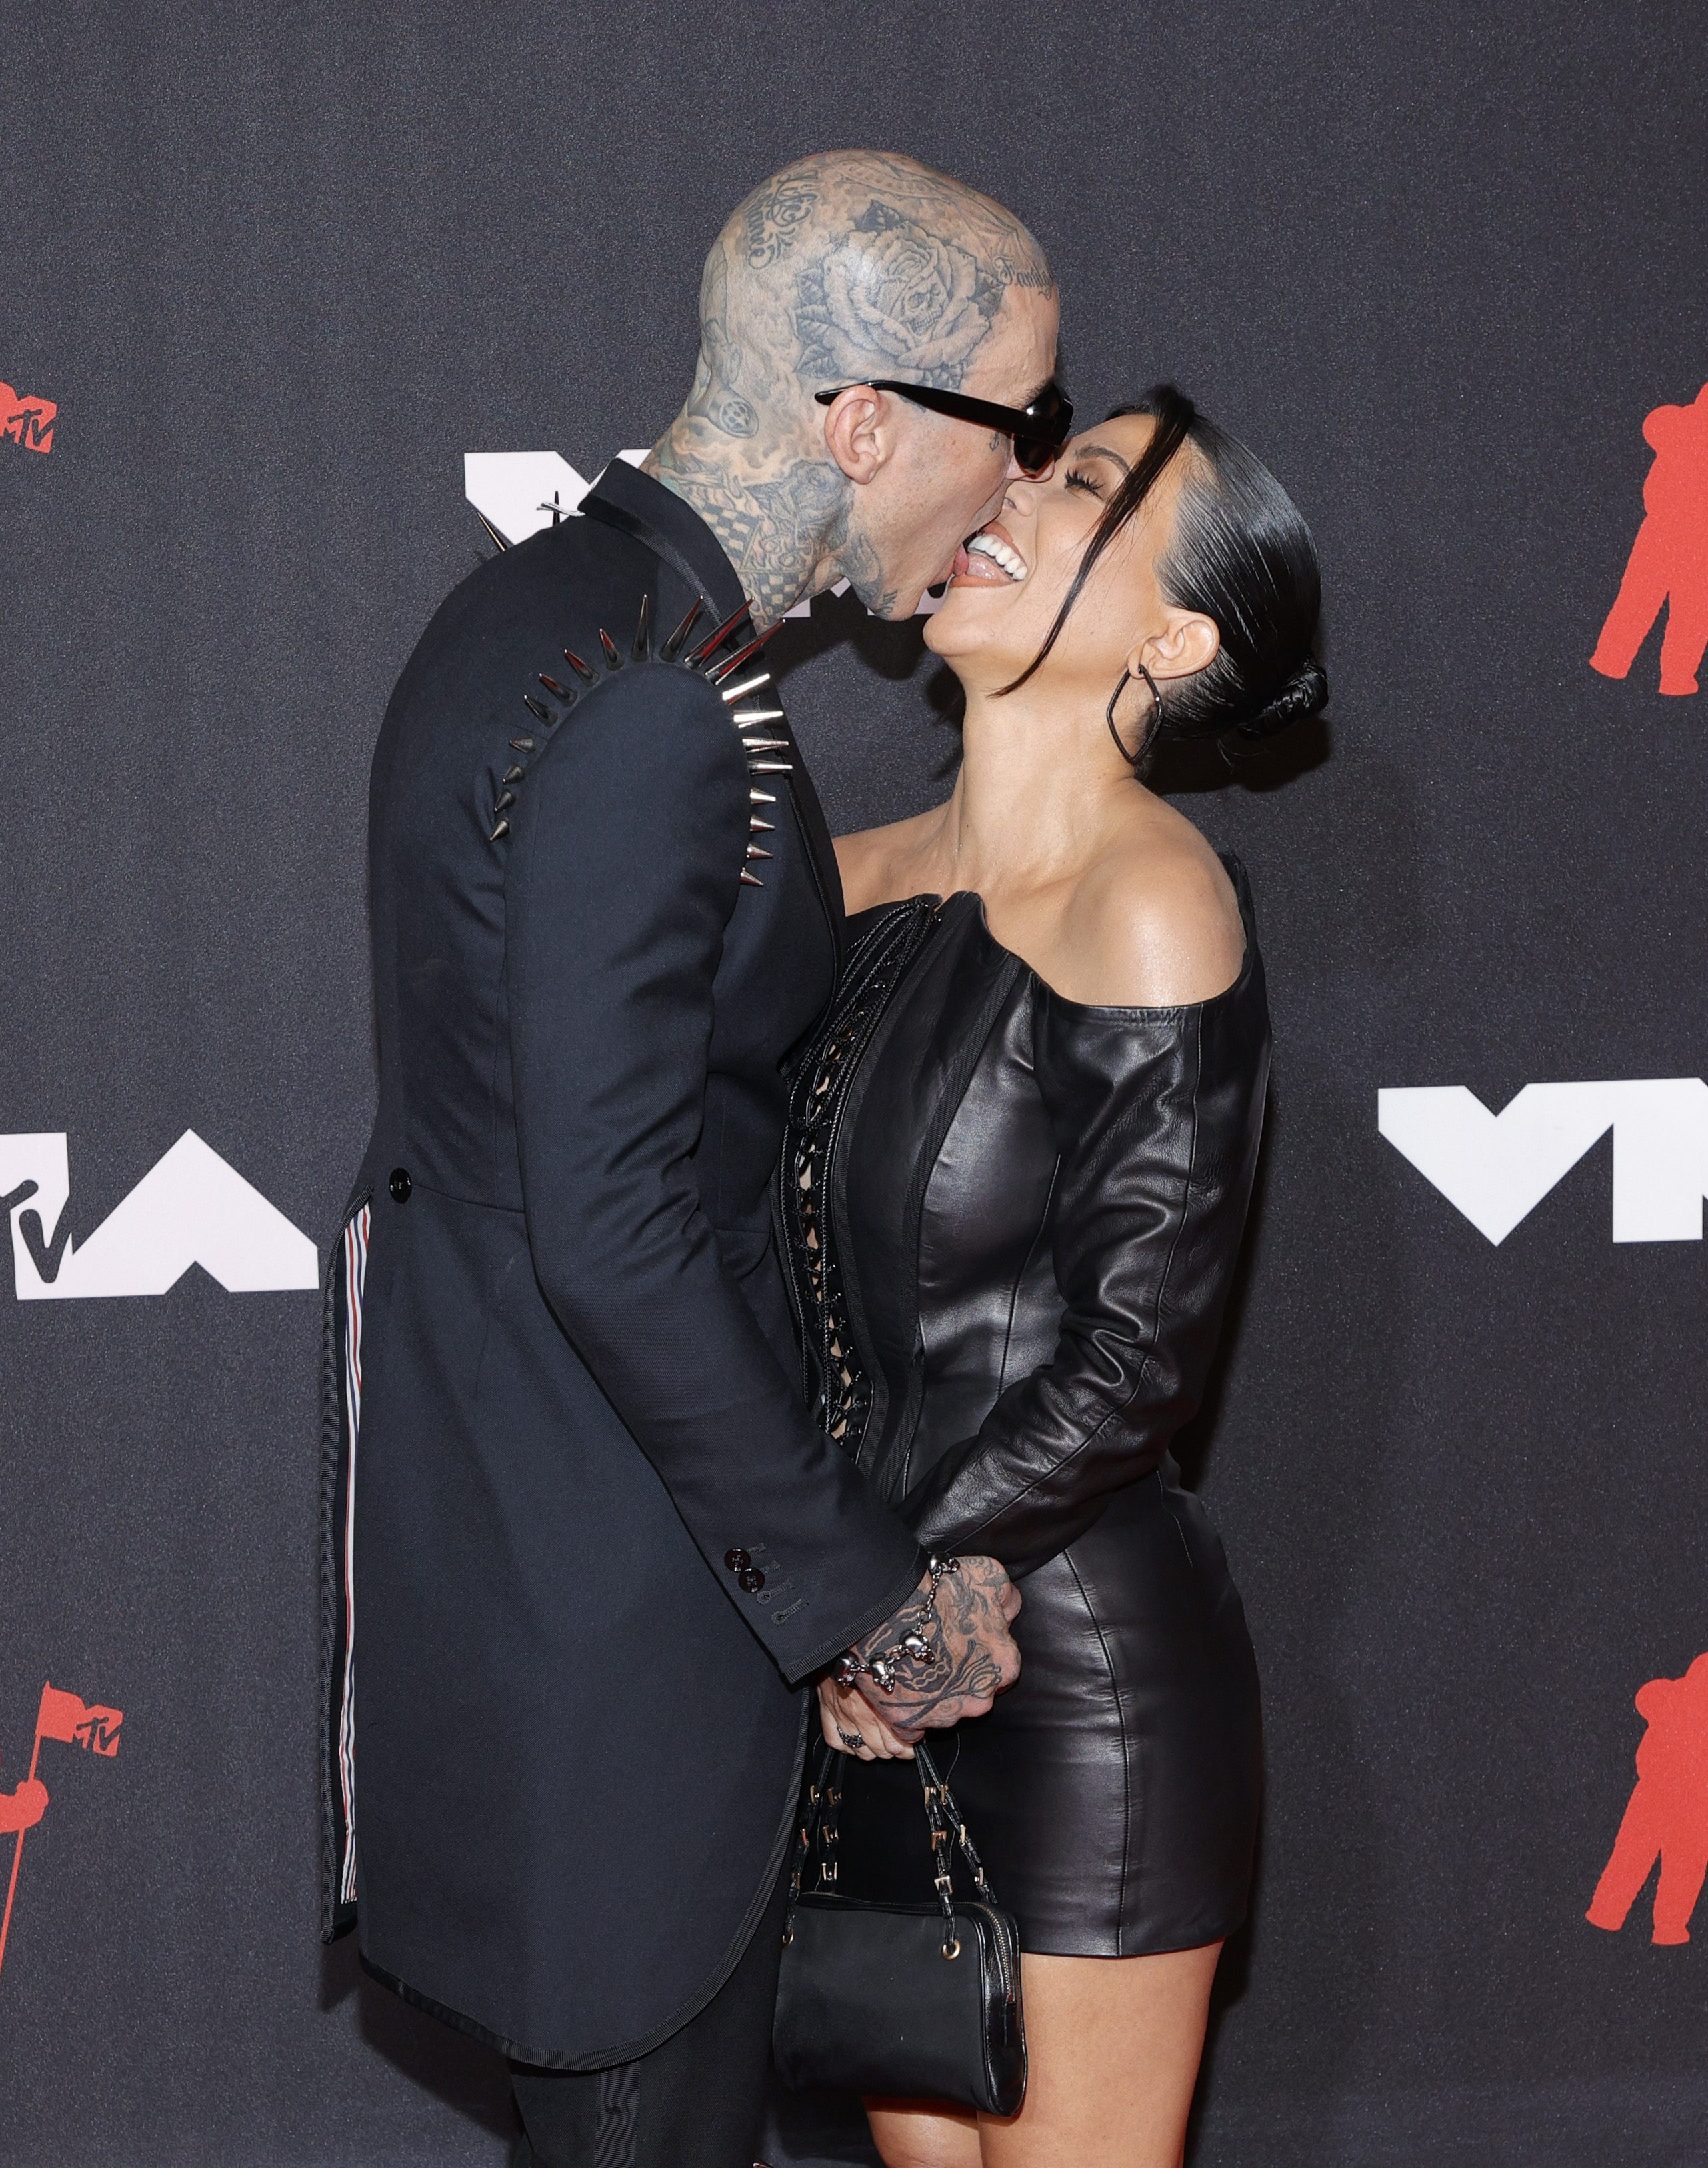 Close-up of Kourtney and Travis tongue kissing at a media event